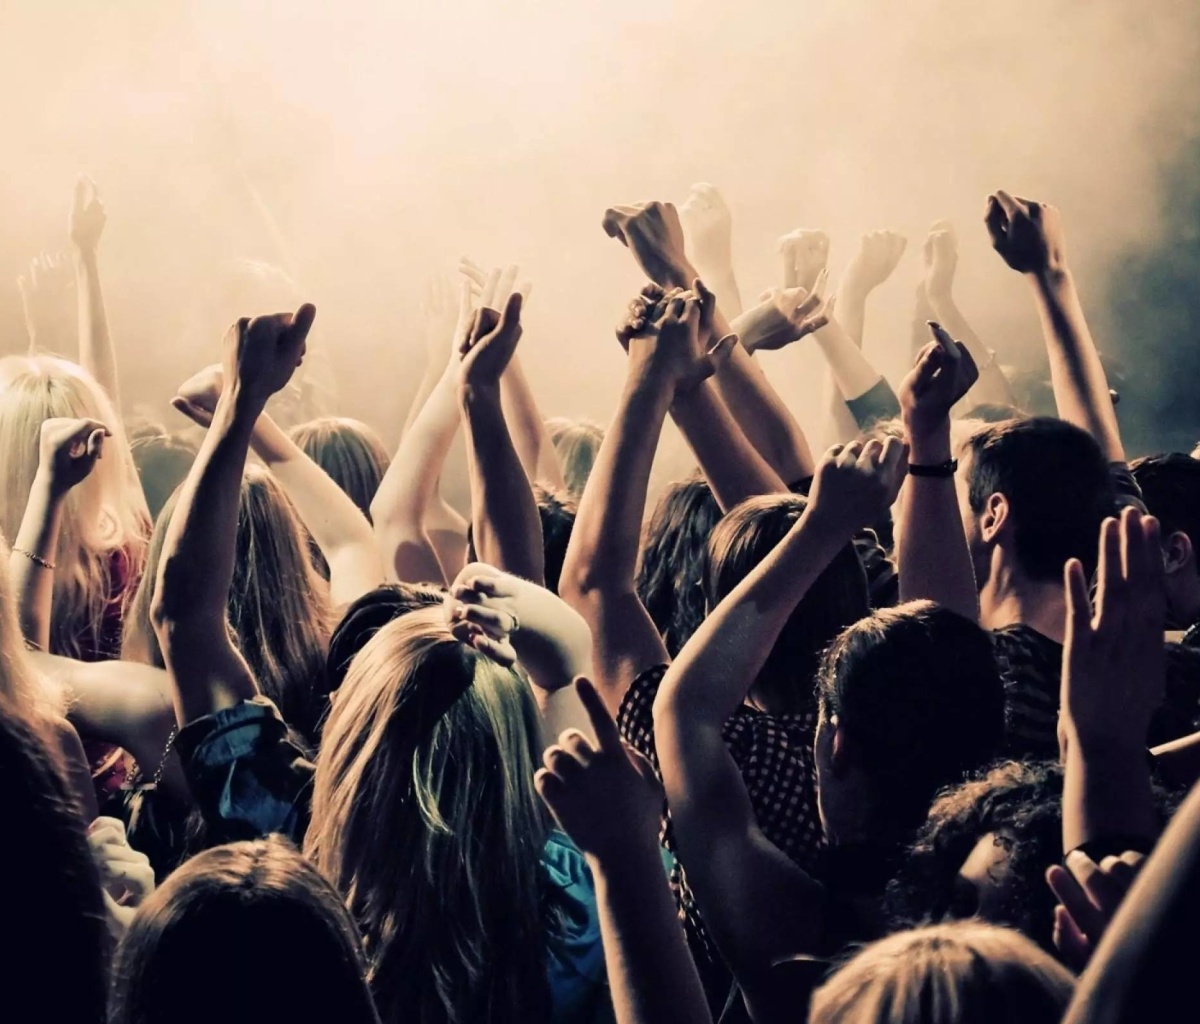 Crazy Party in Night Club, Put your hands up screenshot #1 1200x1024